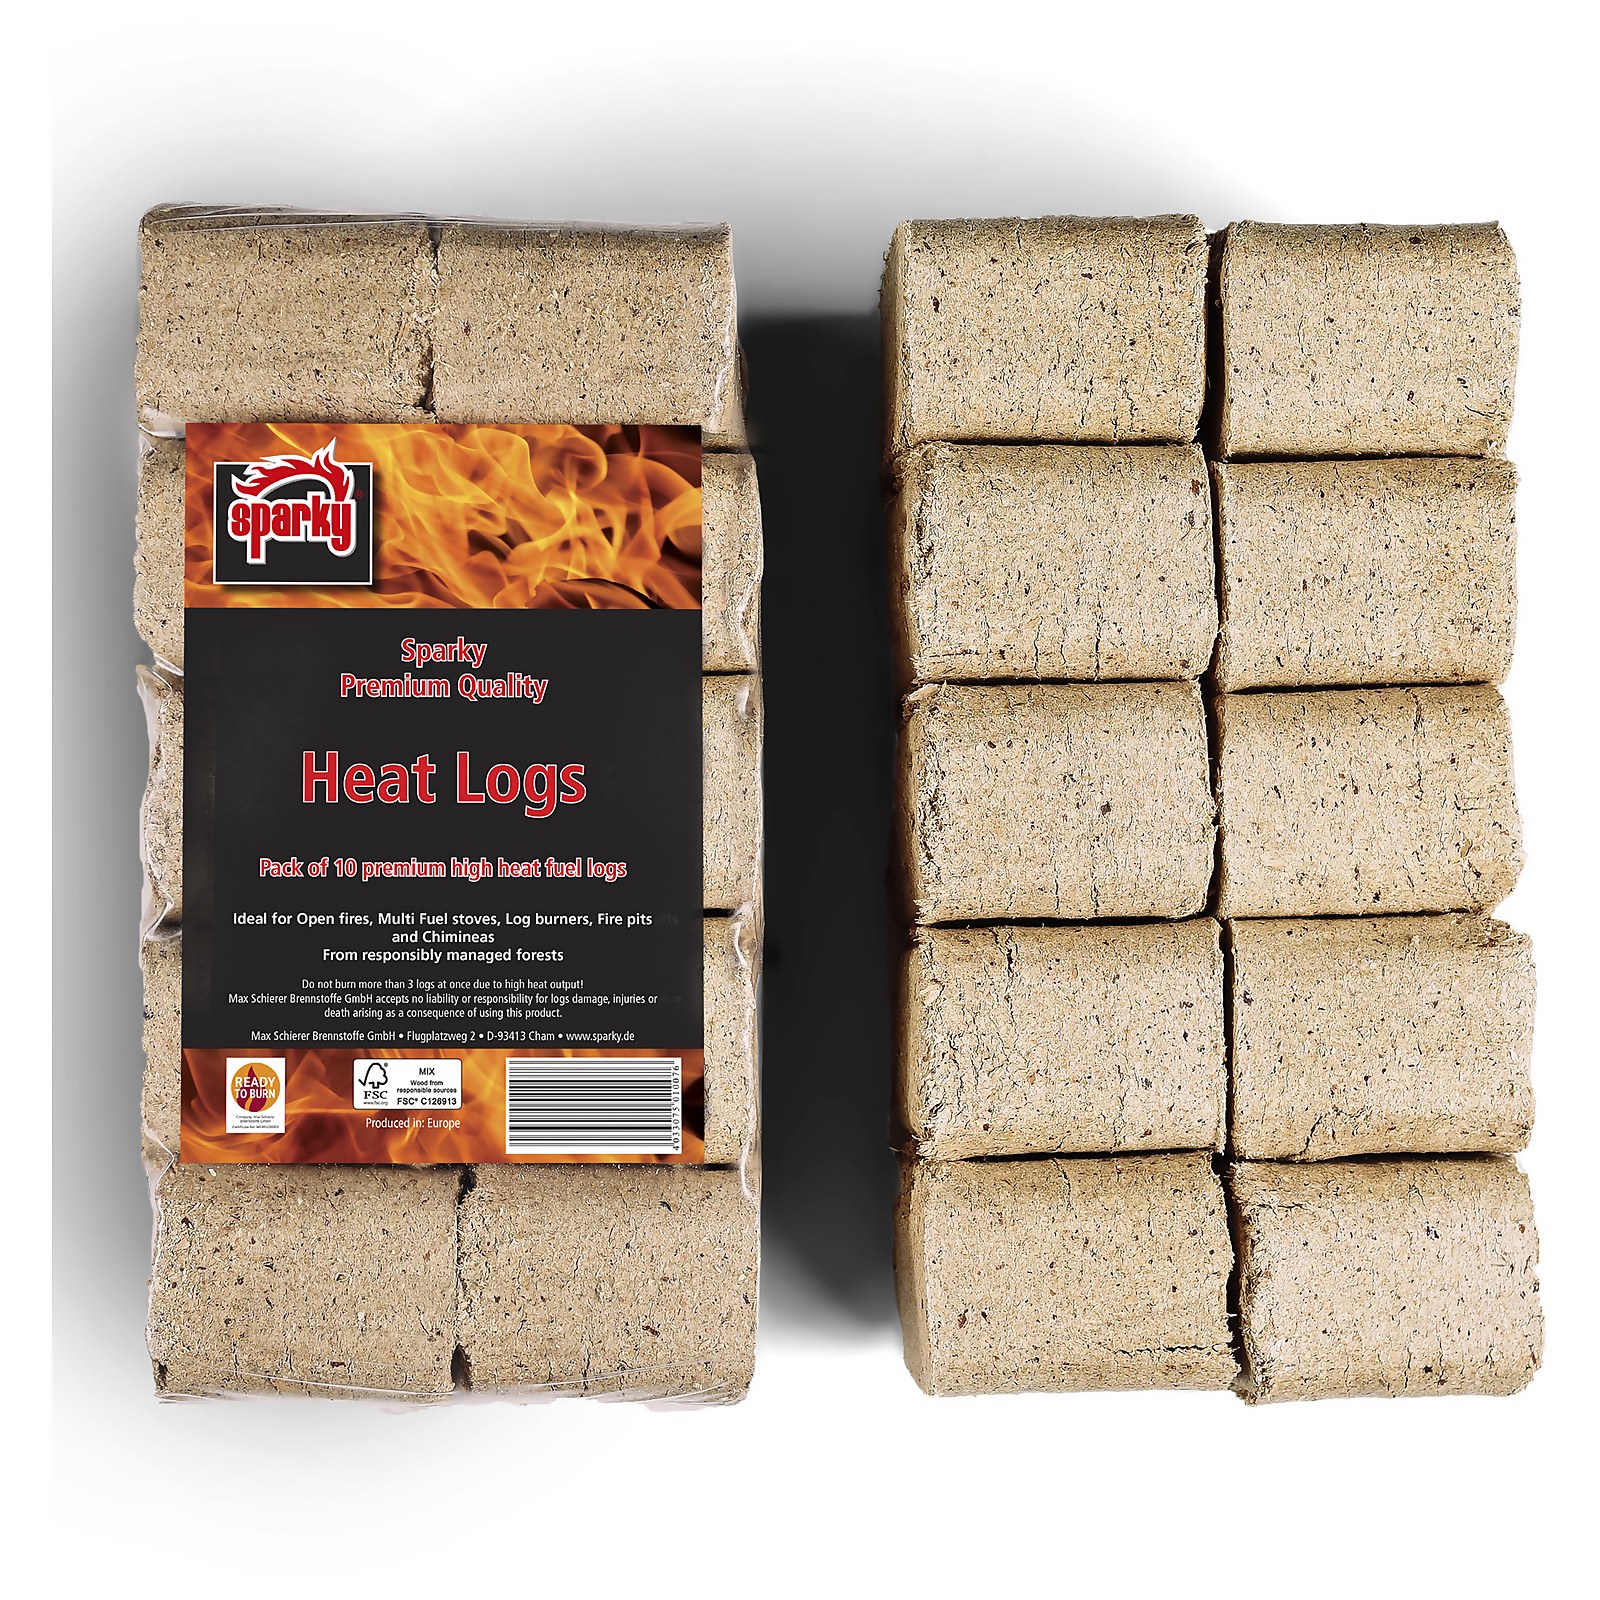 Photo of Sparky Ruf Heat Logs - 10 Pack